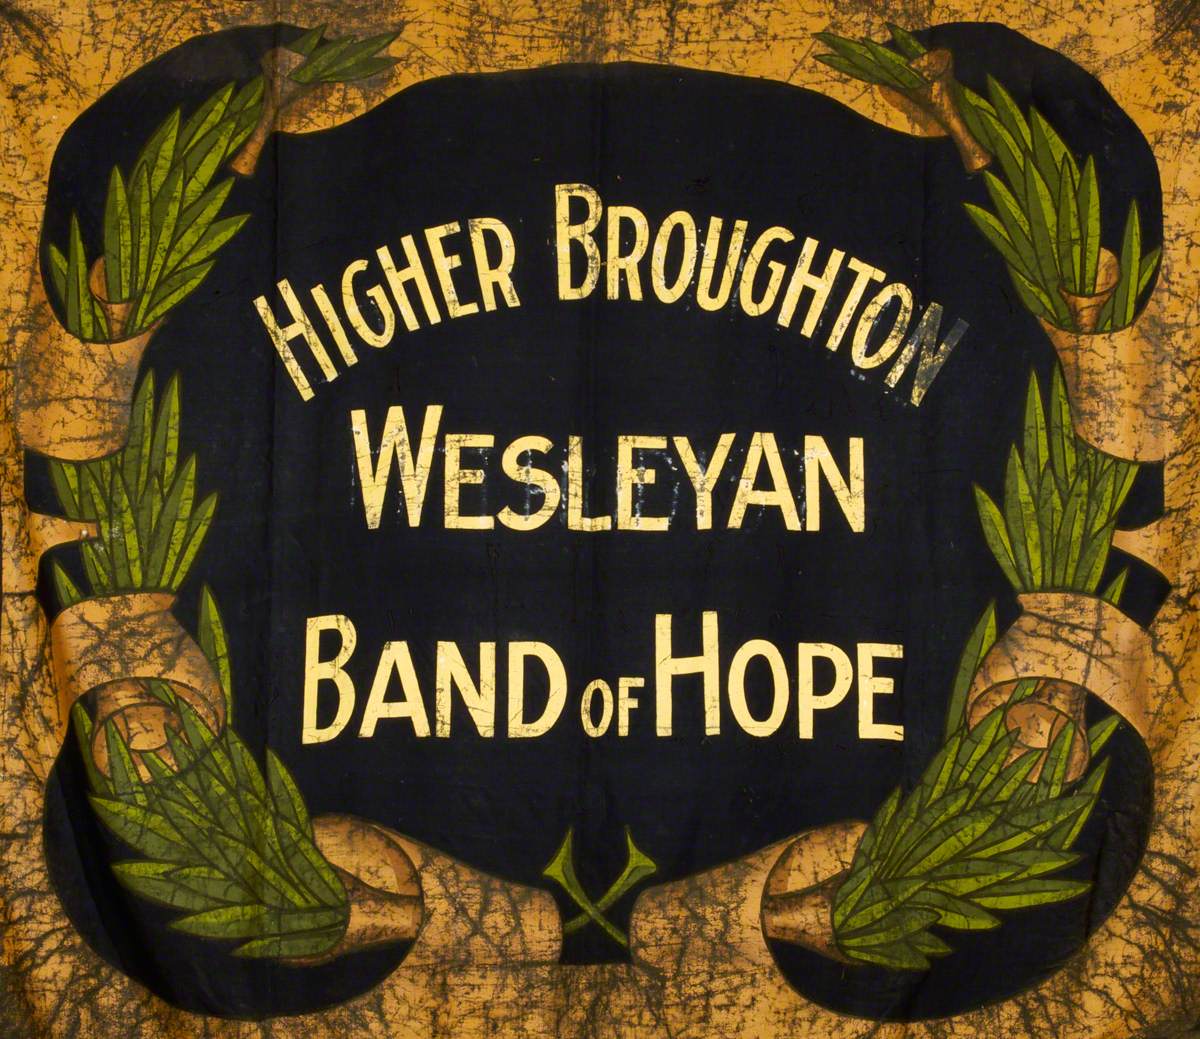 Banner from the Higher Broughton Wesleyan Band of Hope